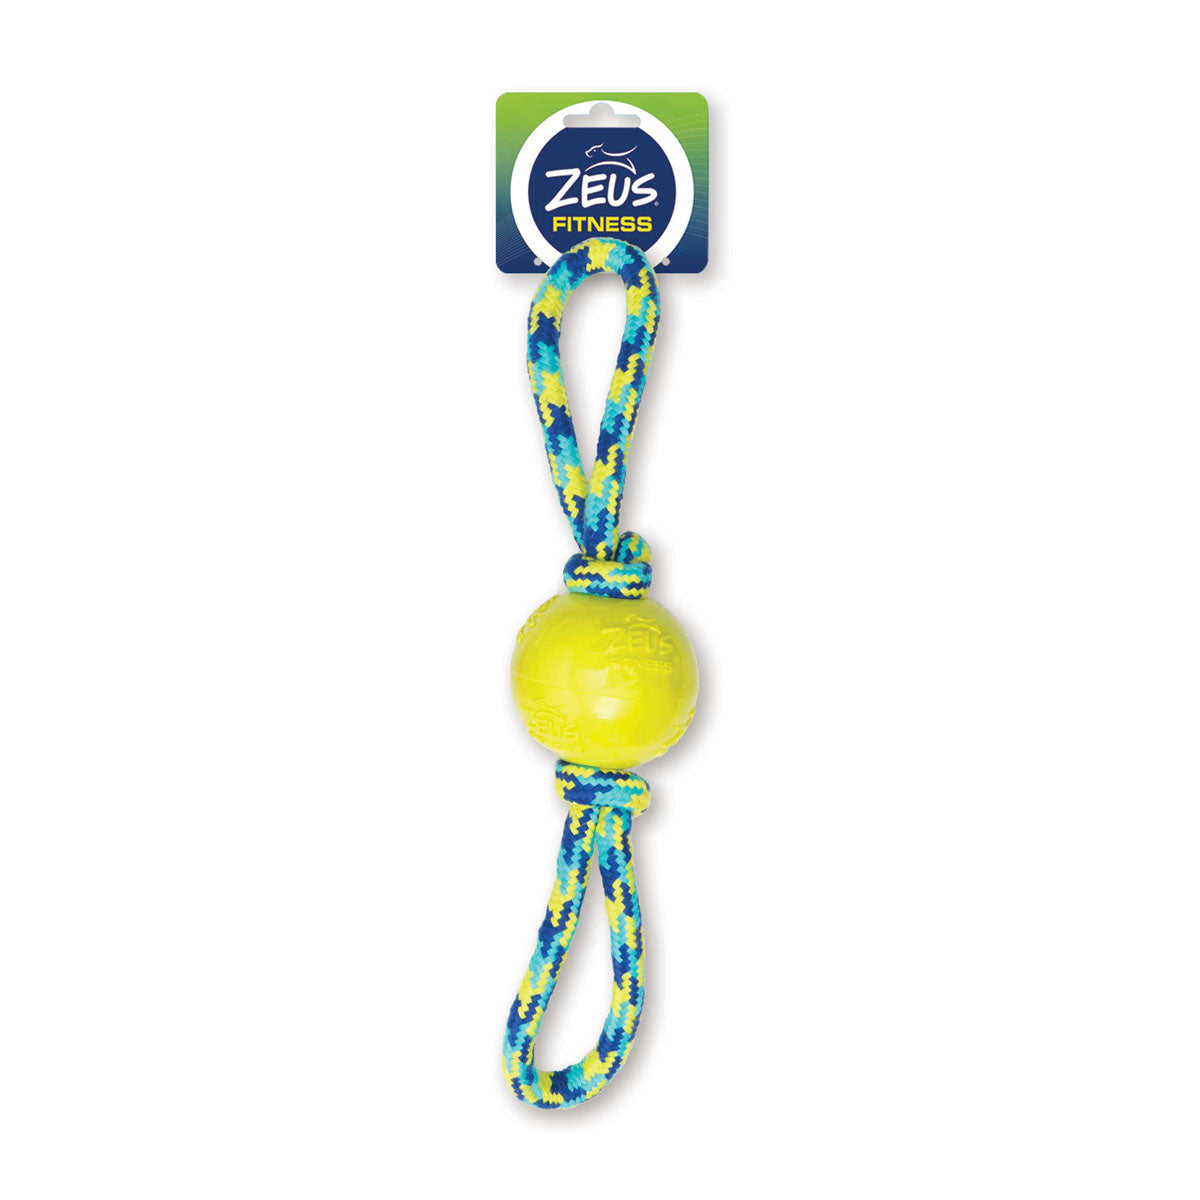 Zeus Fitness Dog Toys Ball Double tug with TPR ball 41cm